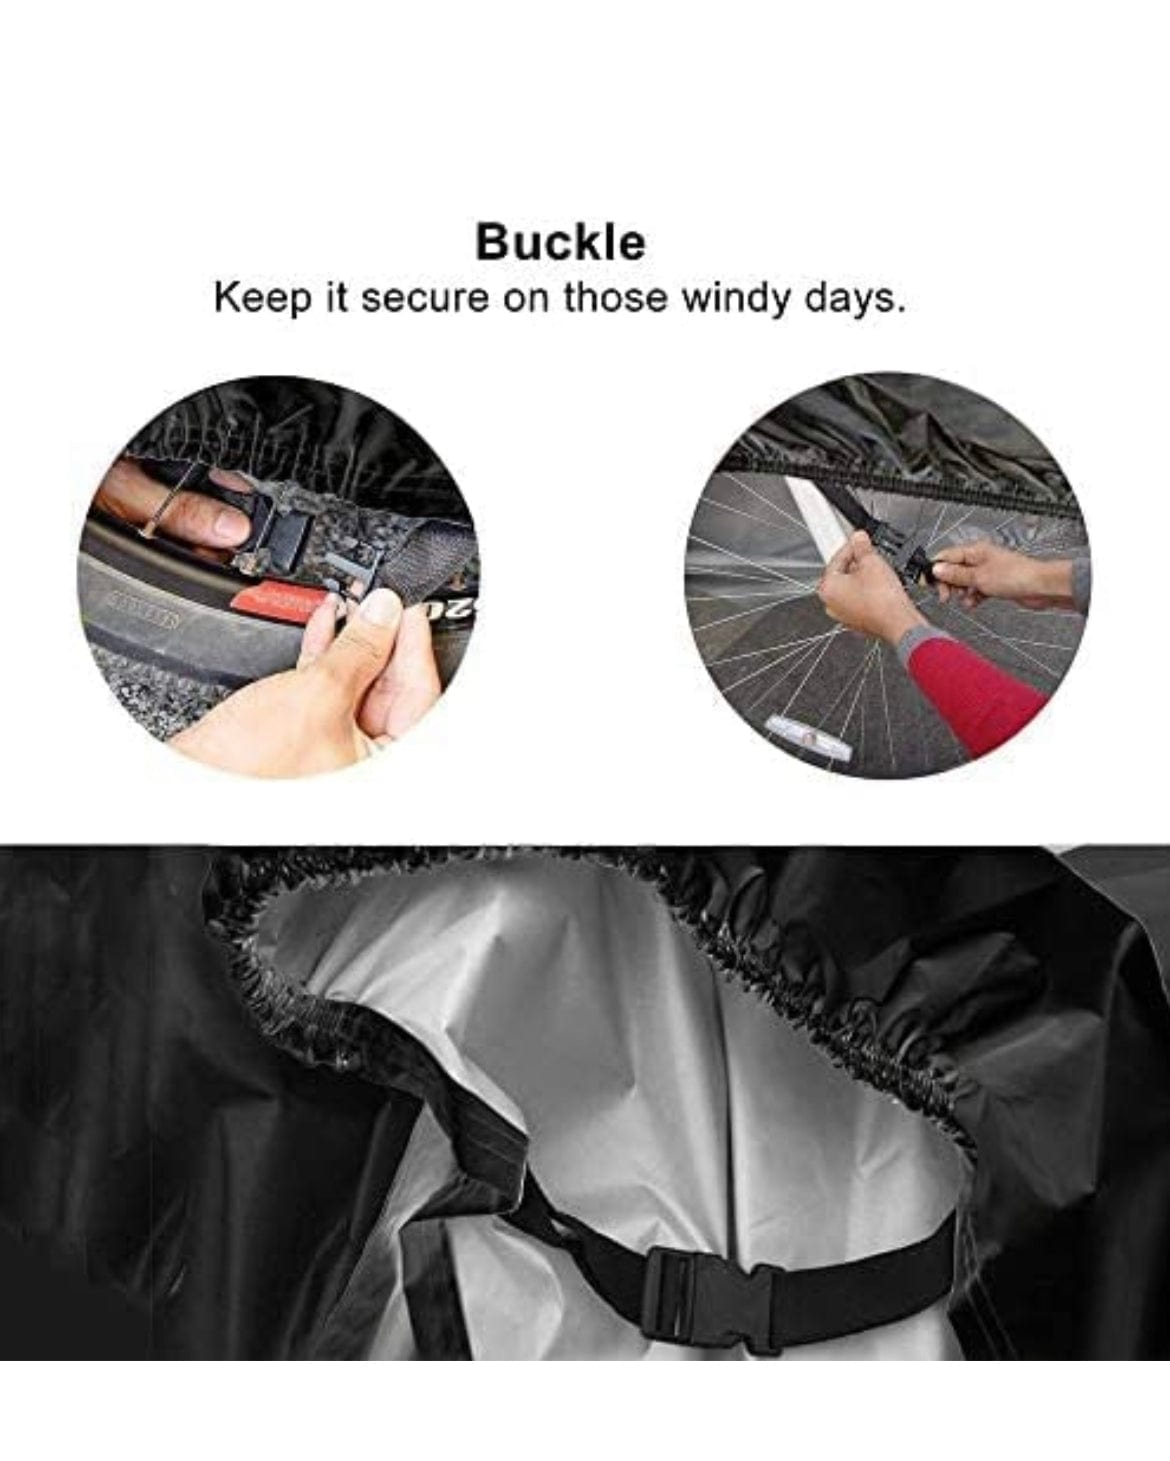 Bike Cover for 2 or 3 Bikes Outdoor Waterproof Bicycle Covers - TopRideElectric TopRideElectric